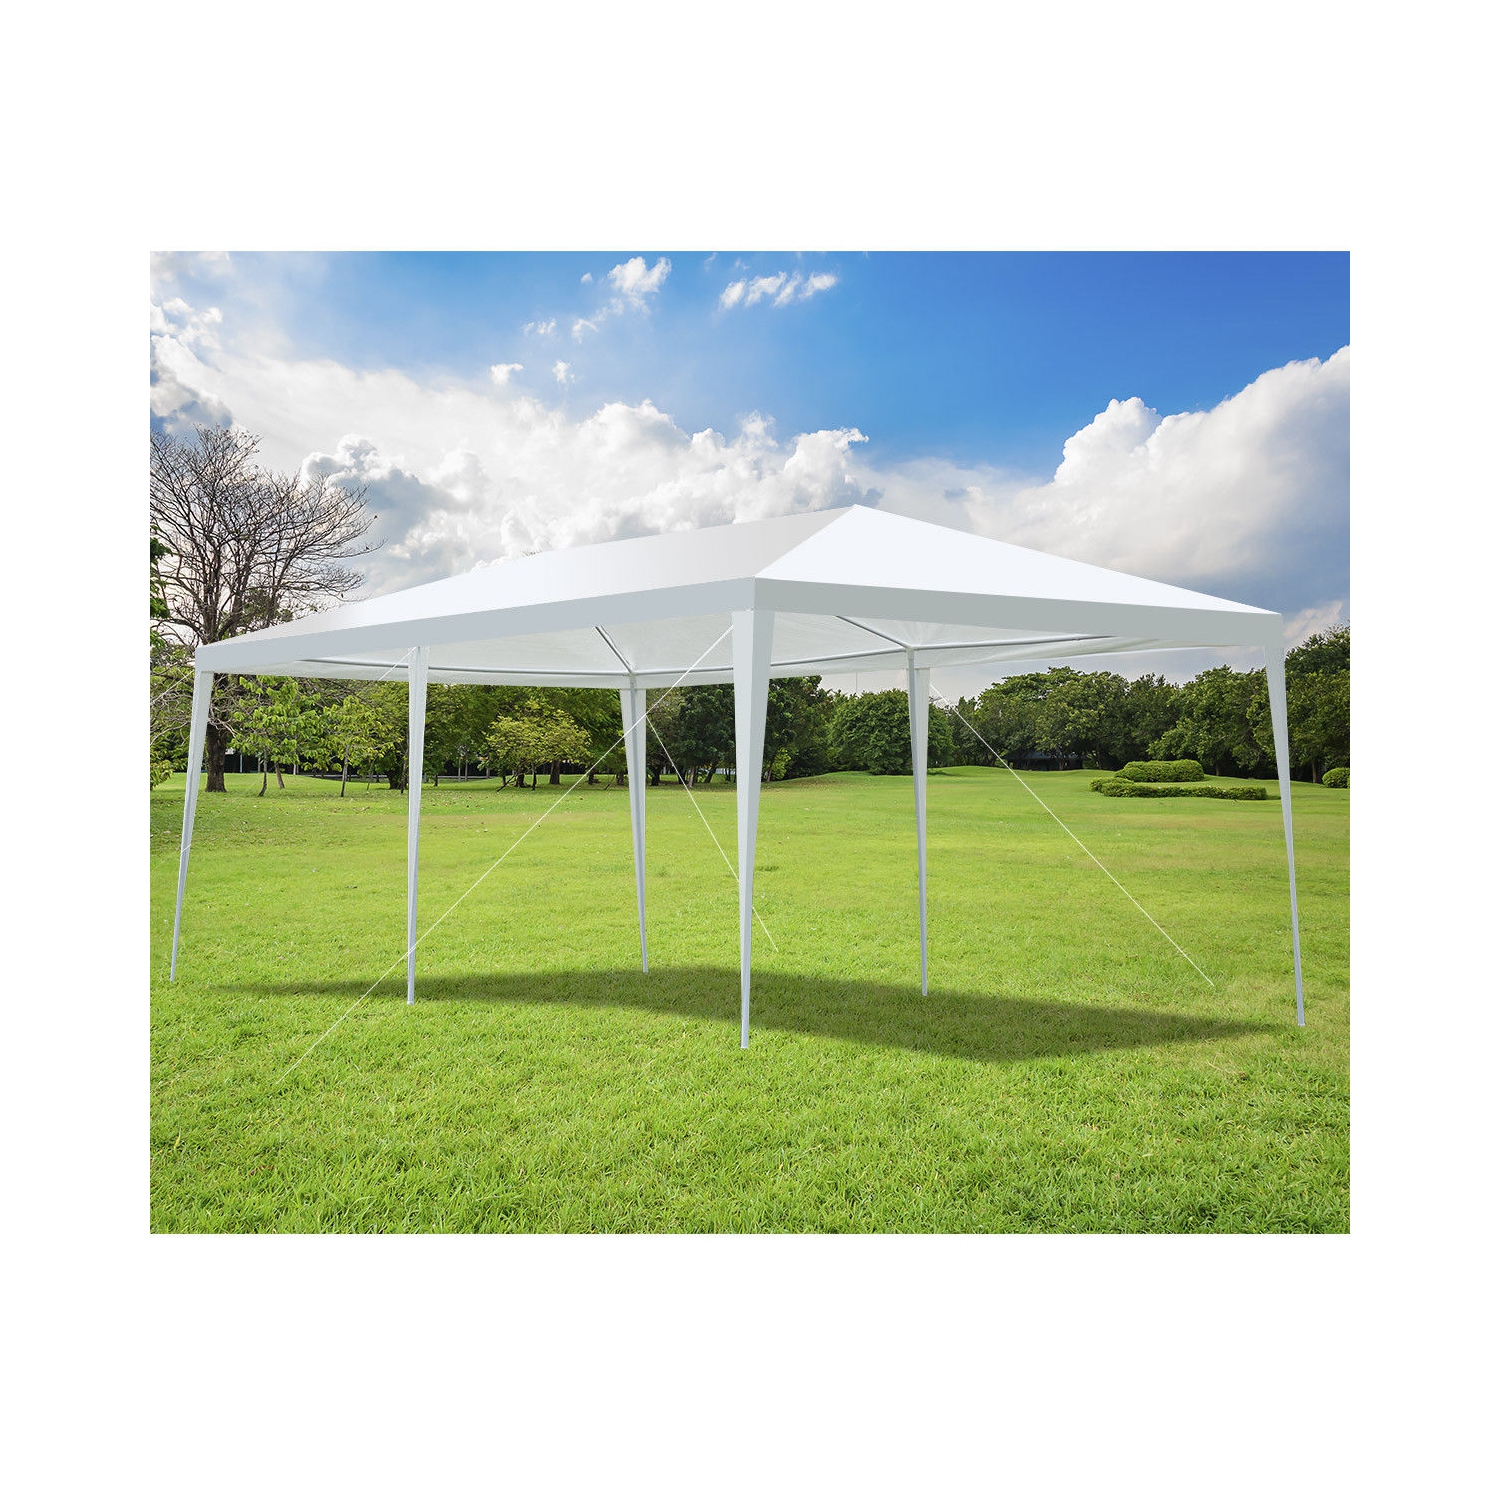 Costway 10'x20'Canopy Party Wedding Tent Heavy Duty Gazebo Pavilion Cater Event Outdoor